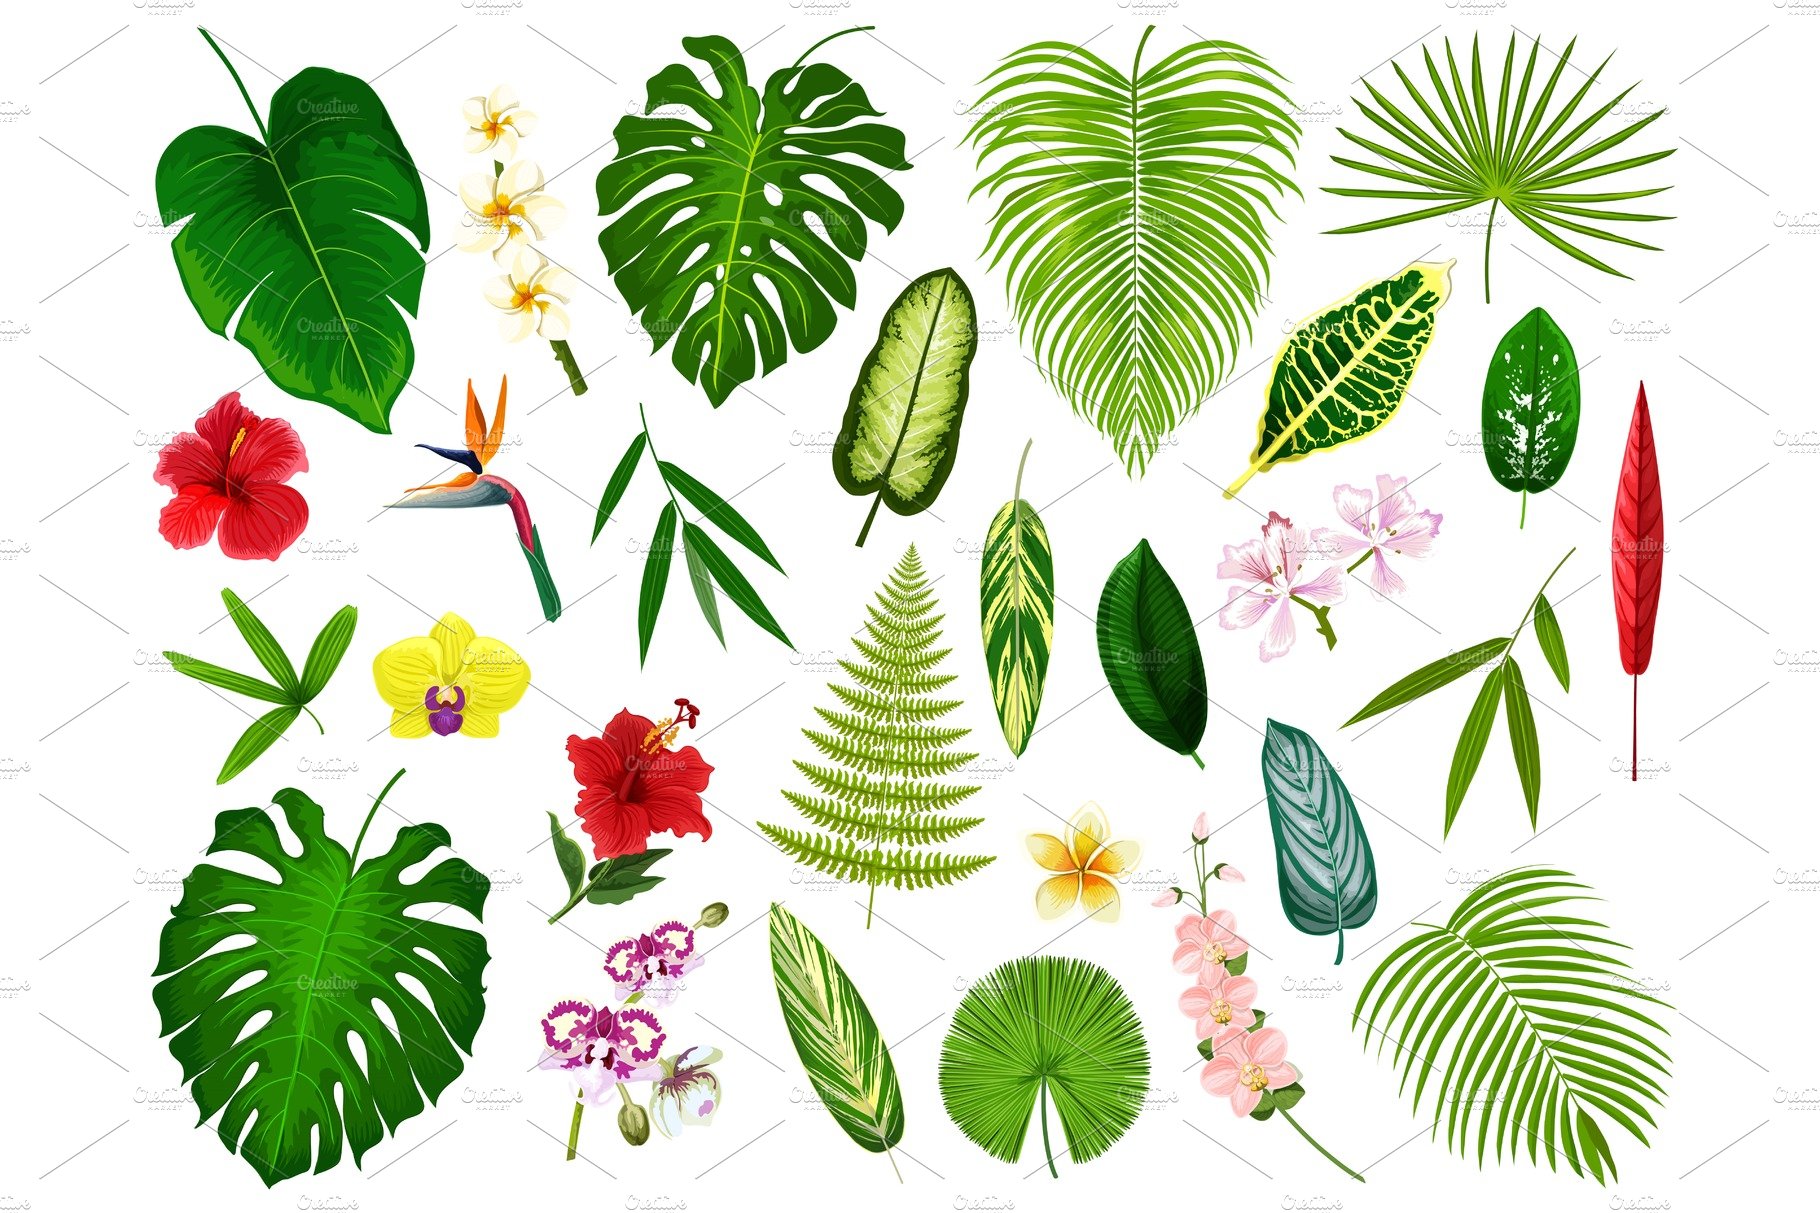 Variety of tropical leaves and flowers.